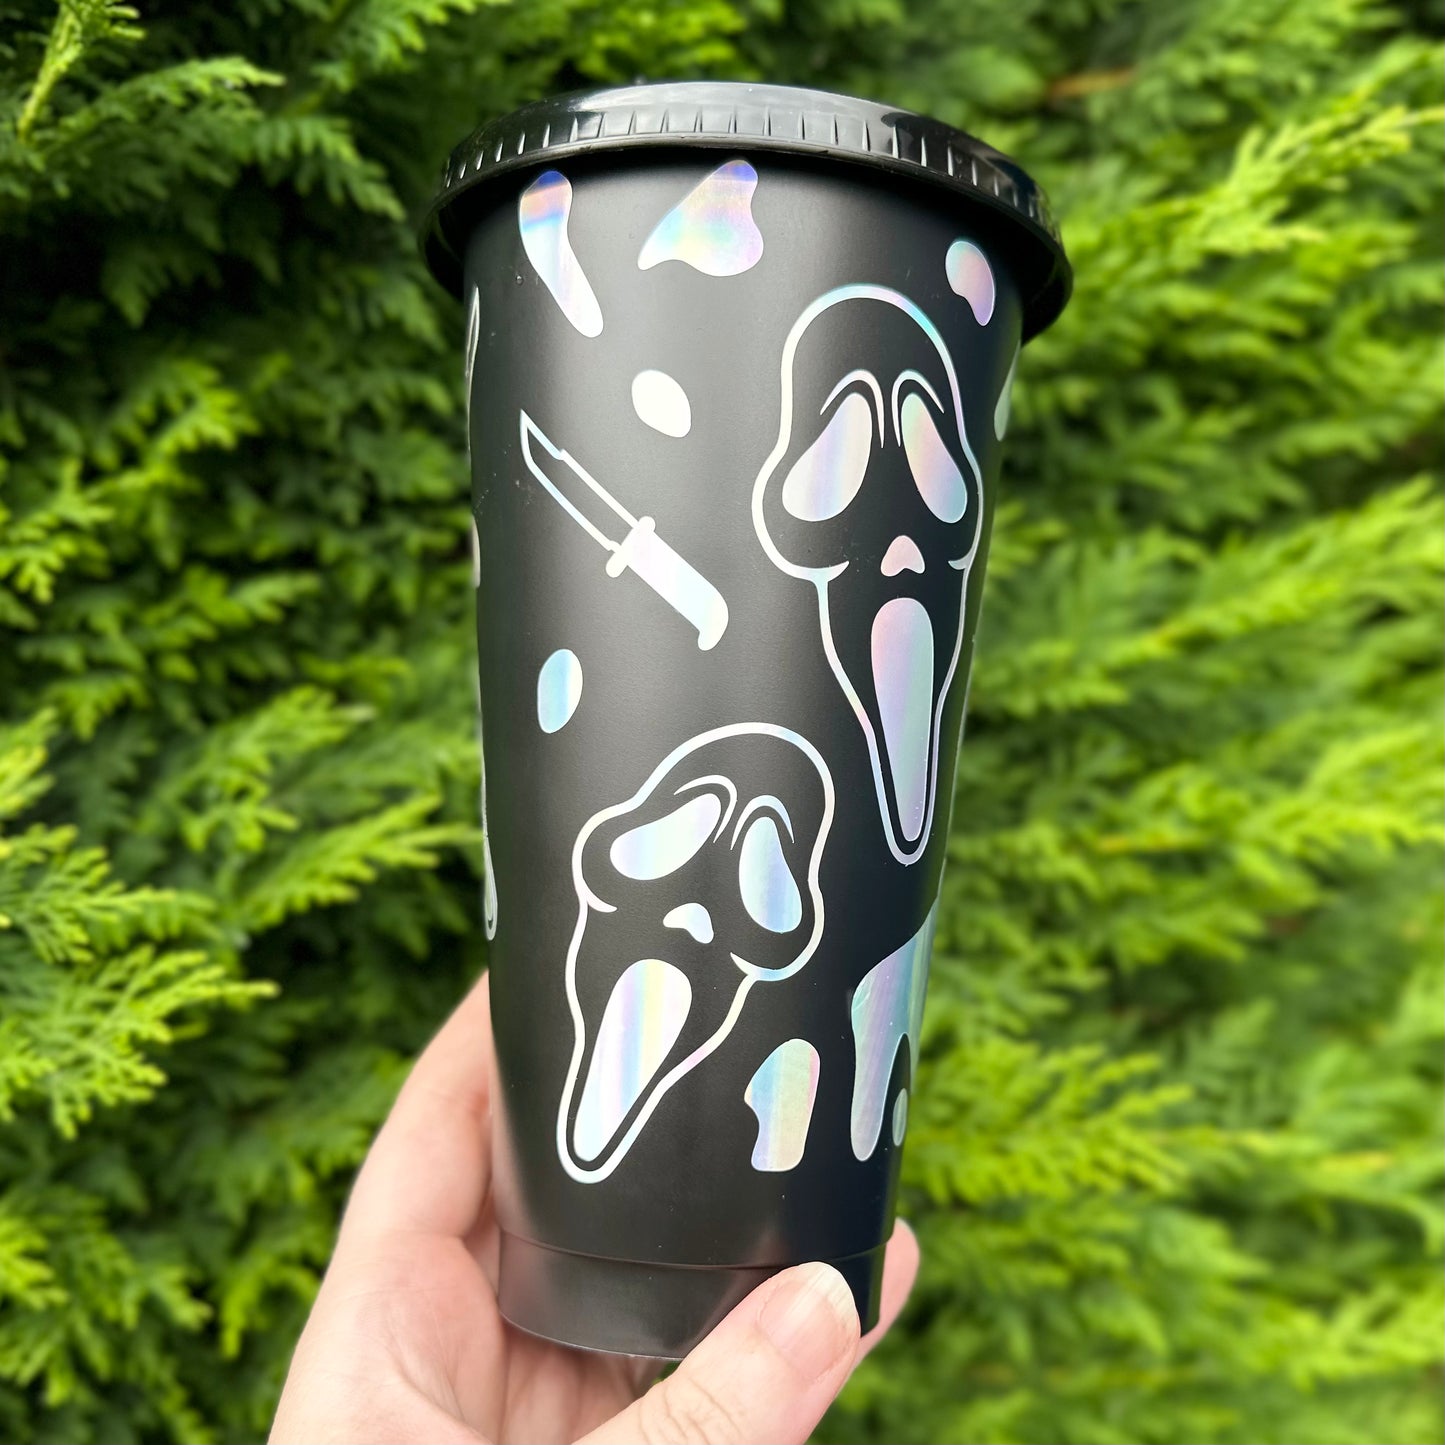 Holographic Scream cup